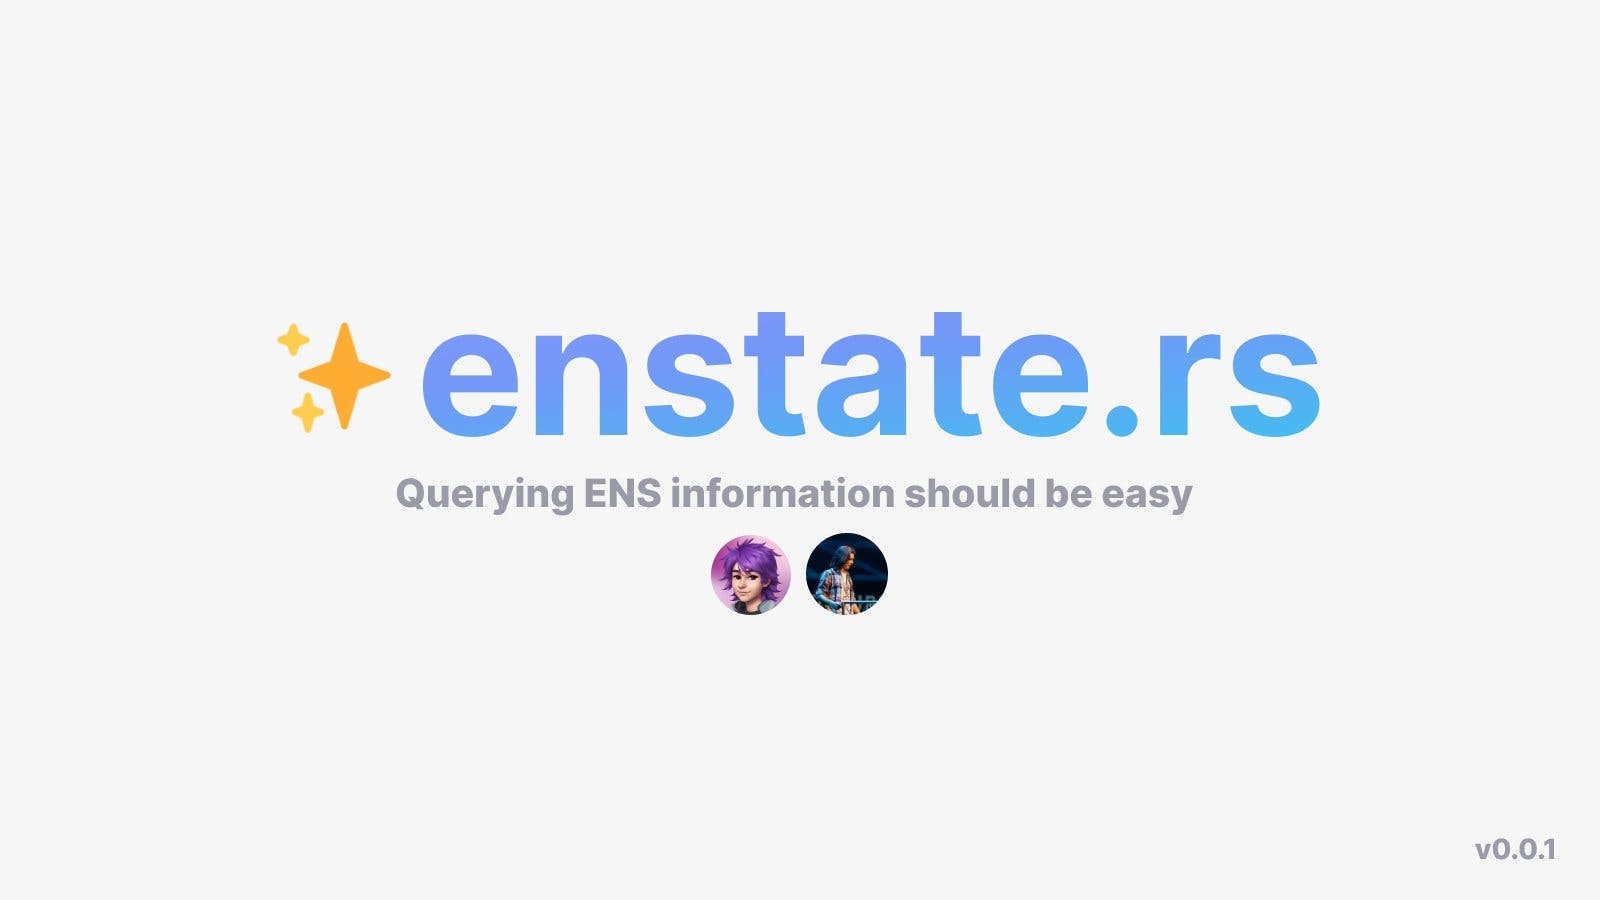 enstate.rs - querying ens information should be easy.